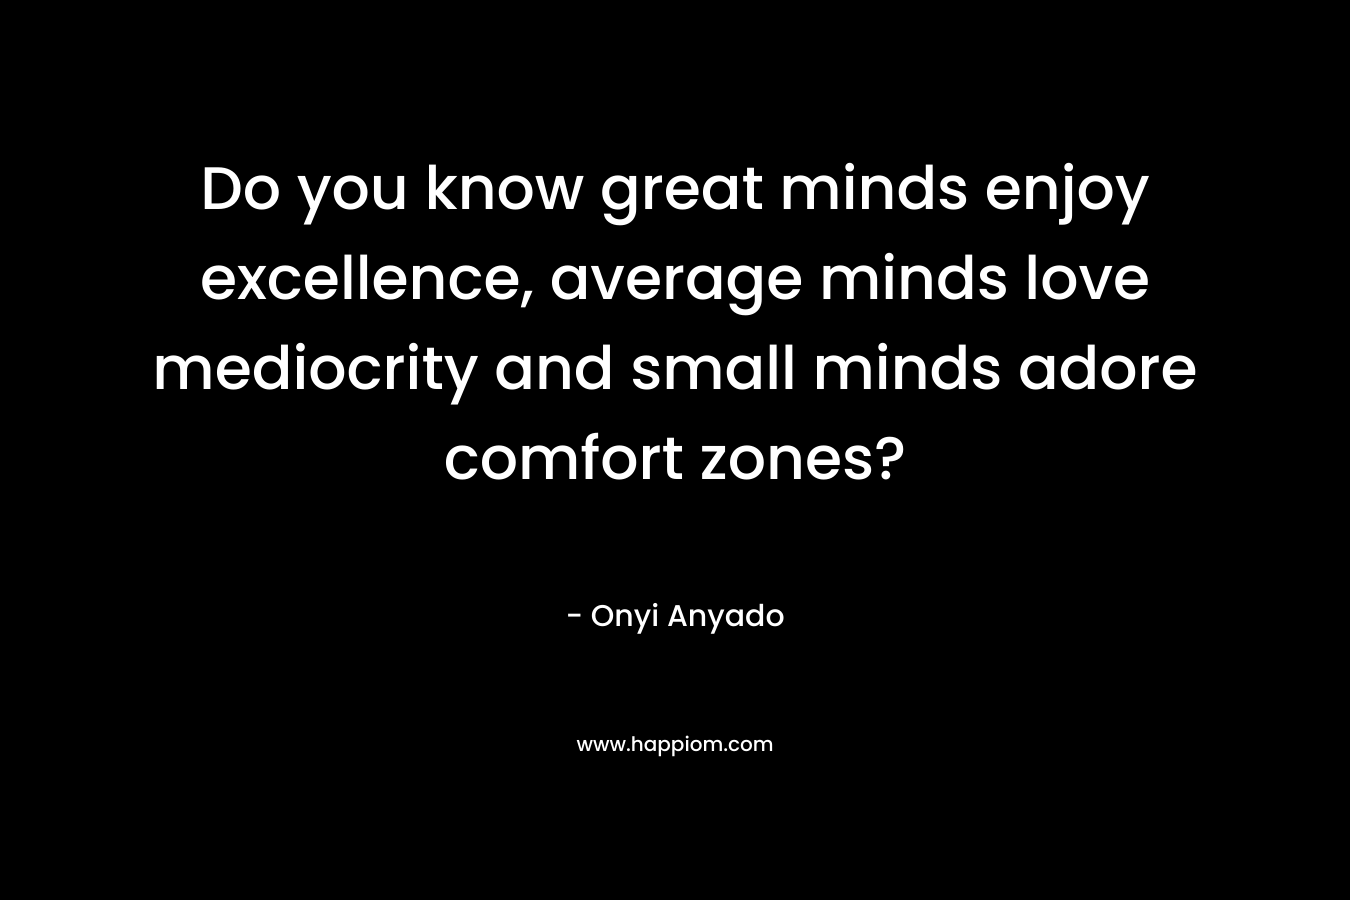 Do you know great minds enjoy excellence, average minds love mediocrity and small minds adore comfort zones?